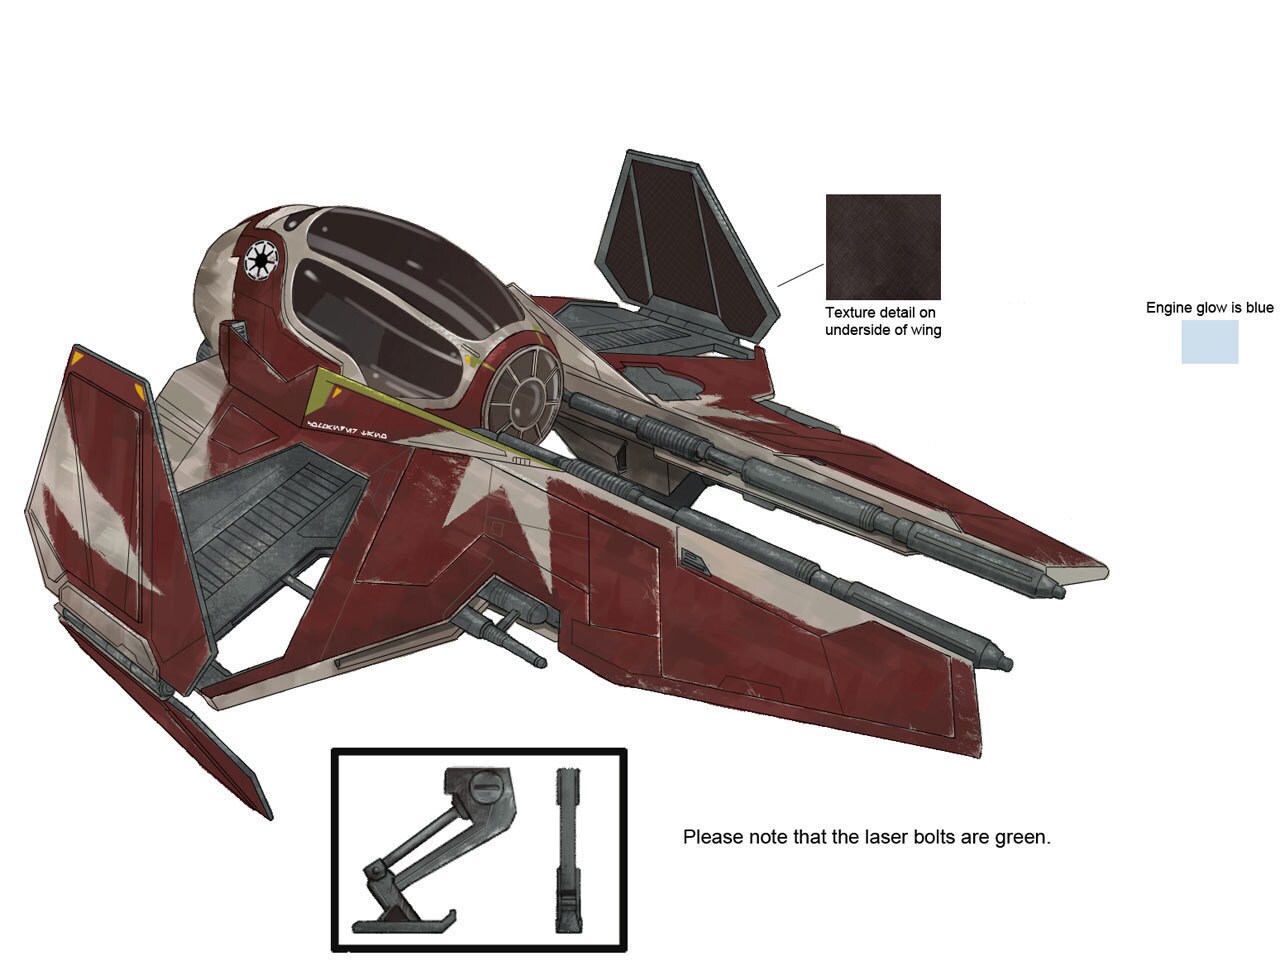 Ahsoka's Jedi interceptor by Will Nichols. The stenciling on the side of the fuselage reads "COMM...